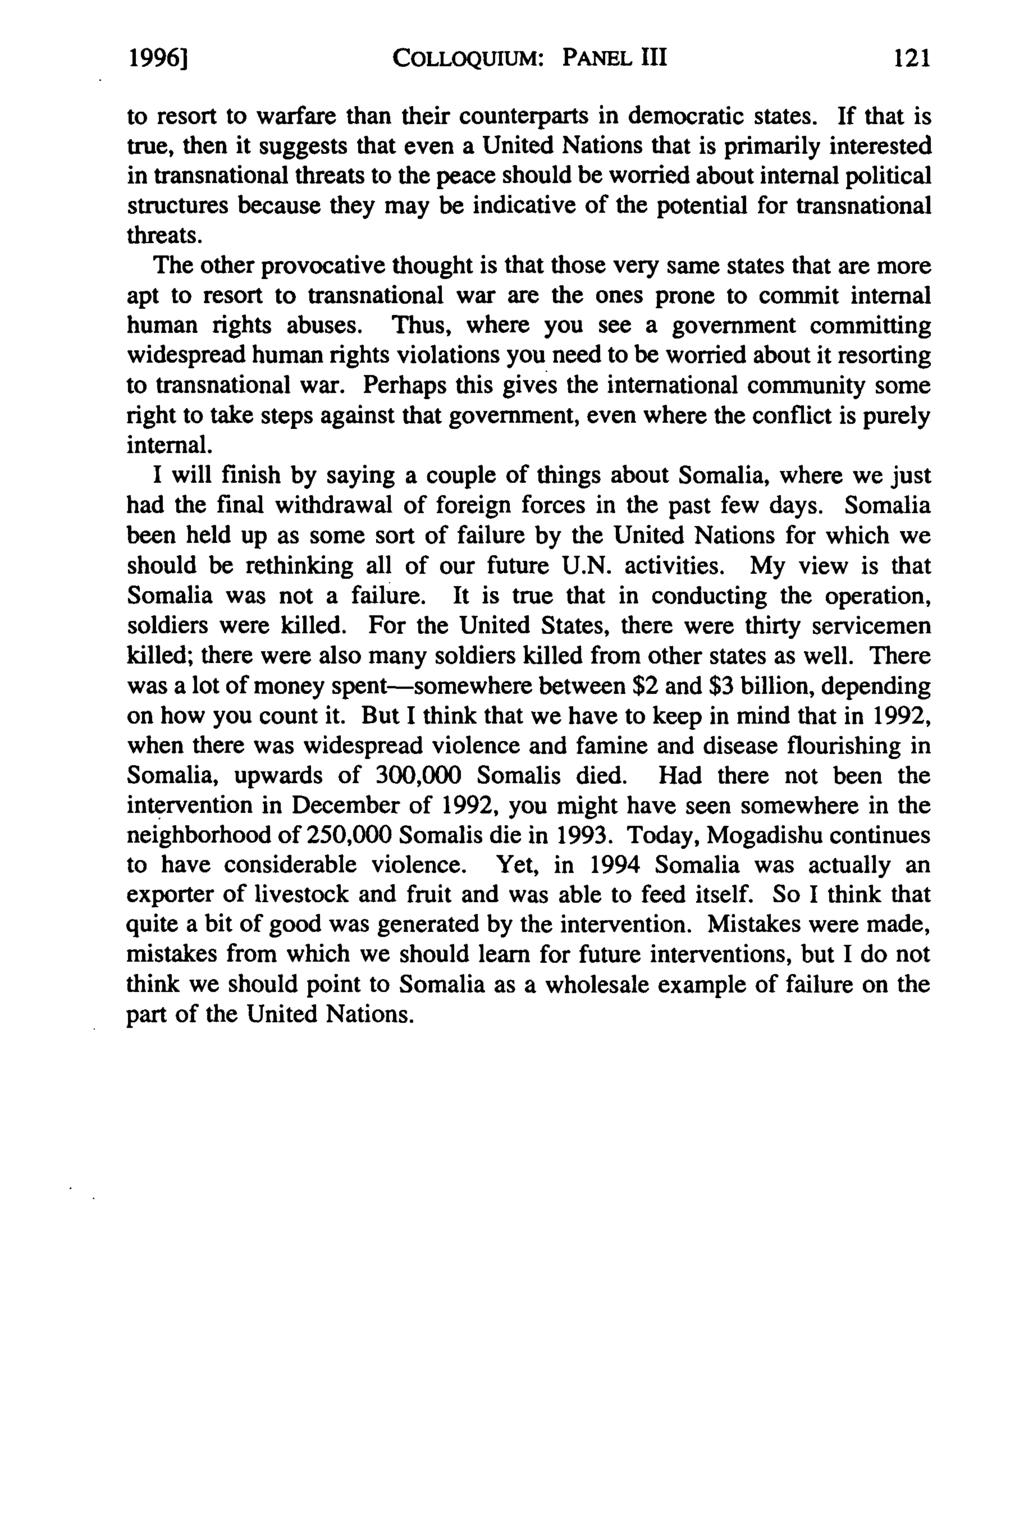 1996] COLLOQUIUM: PANEL III to resort to warfare than their counterparts in democratic states.